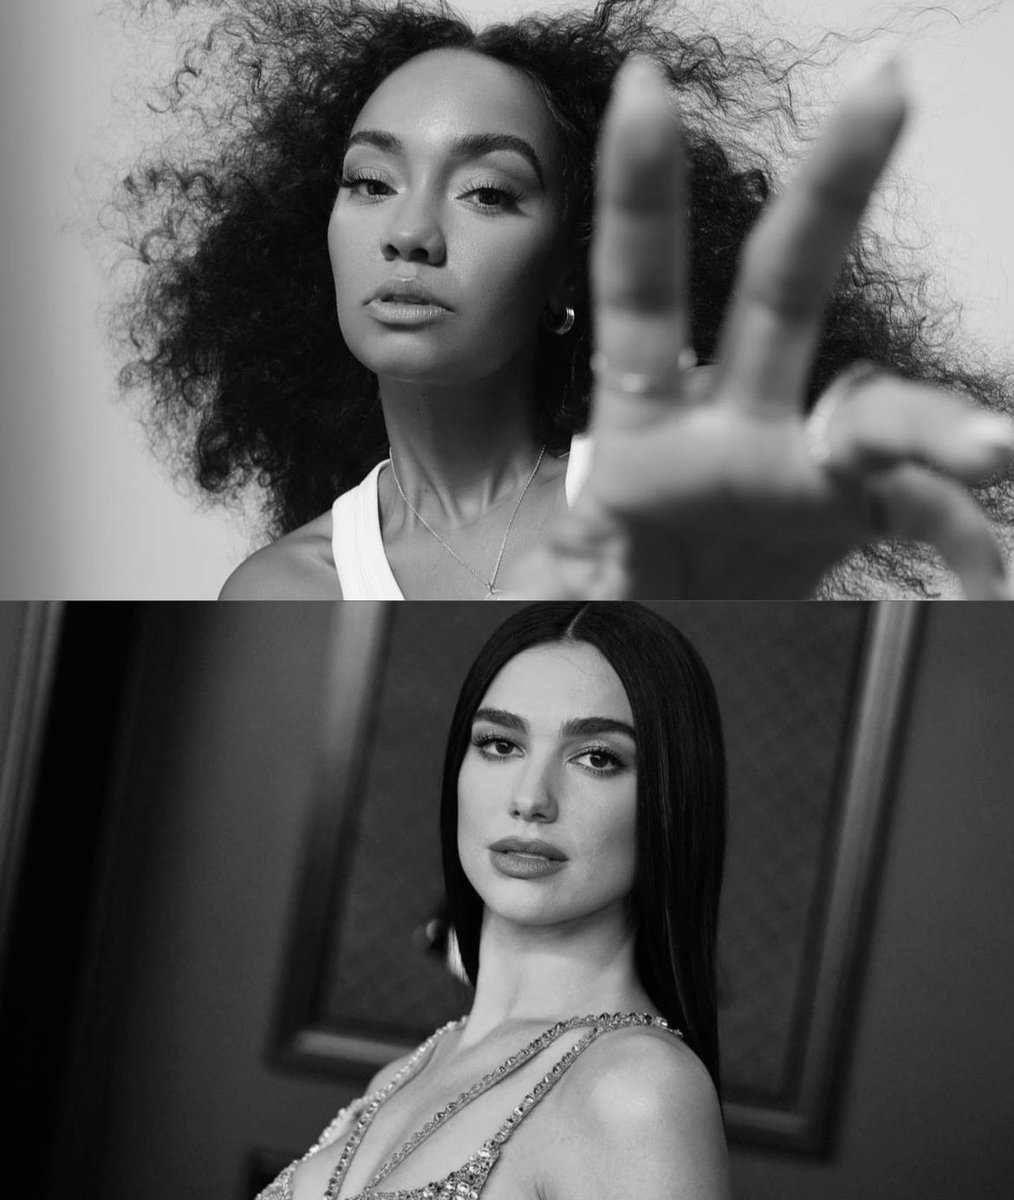 🚨 Warner Records heads talk about Leigh-Anne: 'Ambitions for her are global, and Porritt hopes Leigh-Anne will follow in the footsteps of labelmate Dua Lipa. (...) We want to establish Leigh-Anne as our next global pop star—she has everything it takes.' #leighanneiscoming 👀